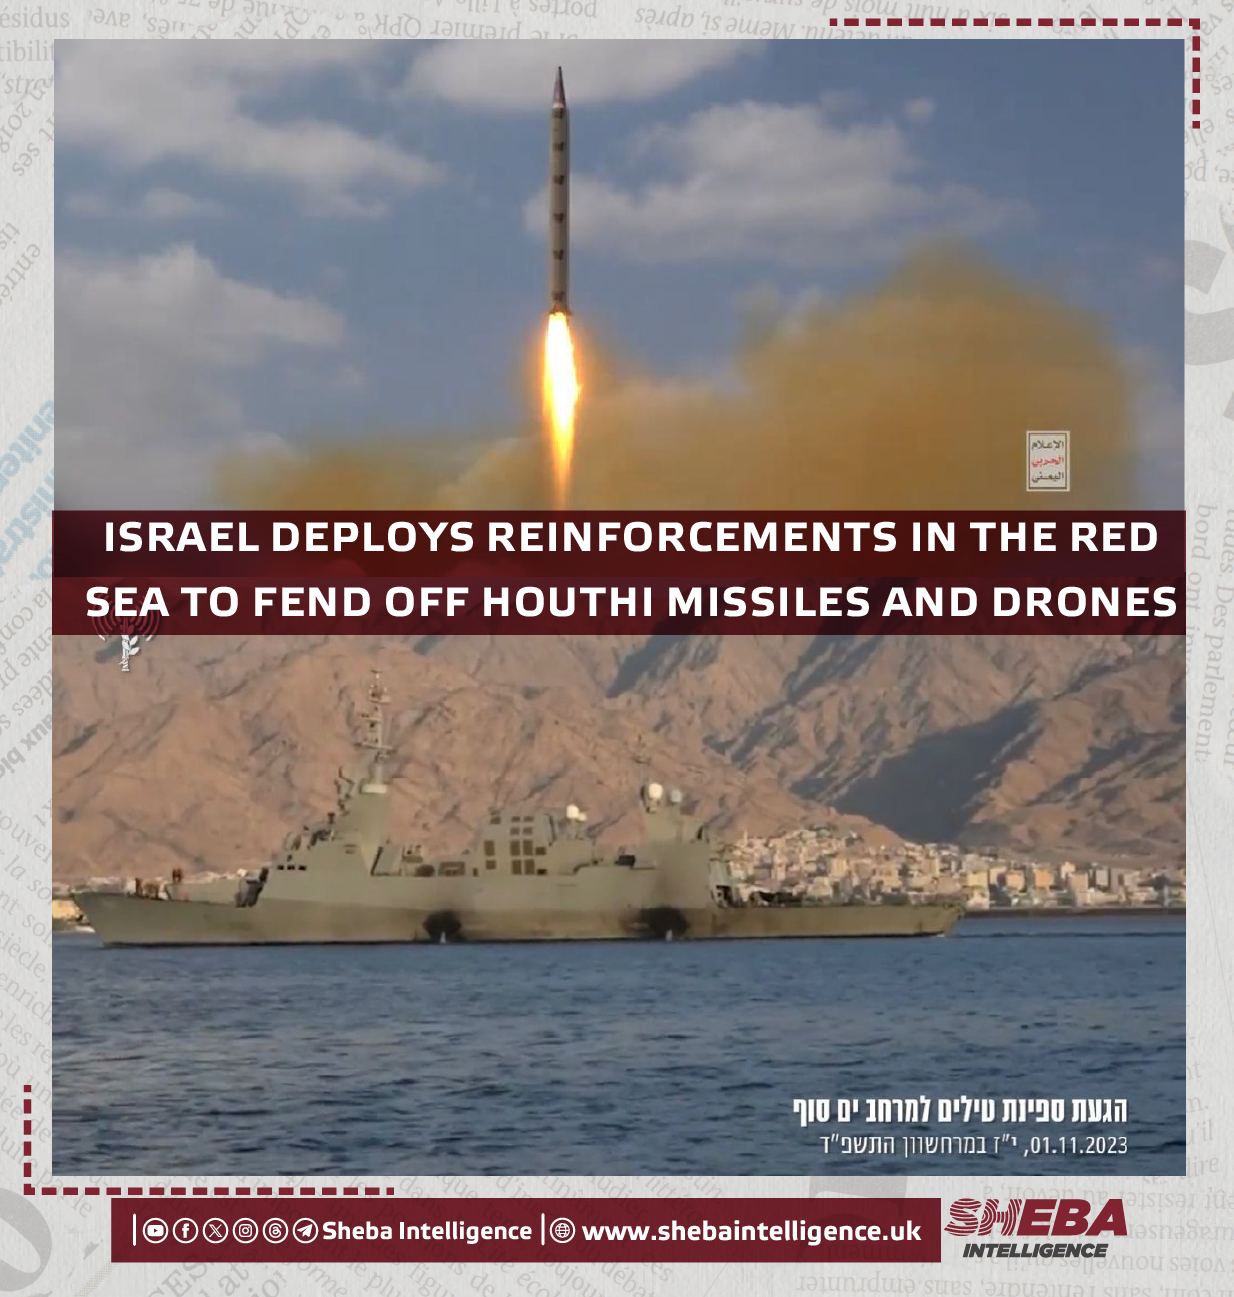 Israel Deploys Reinforcements in the Red Sea to Fend off Houthi Missiles and Drones (Video)